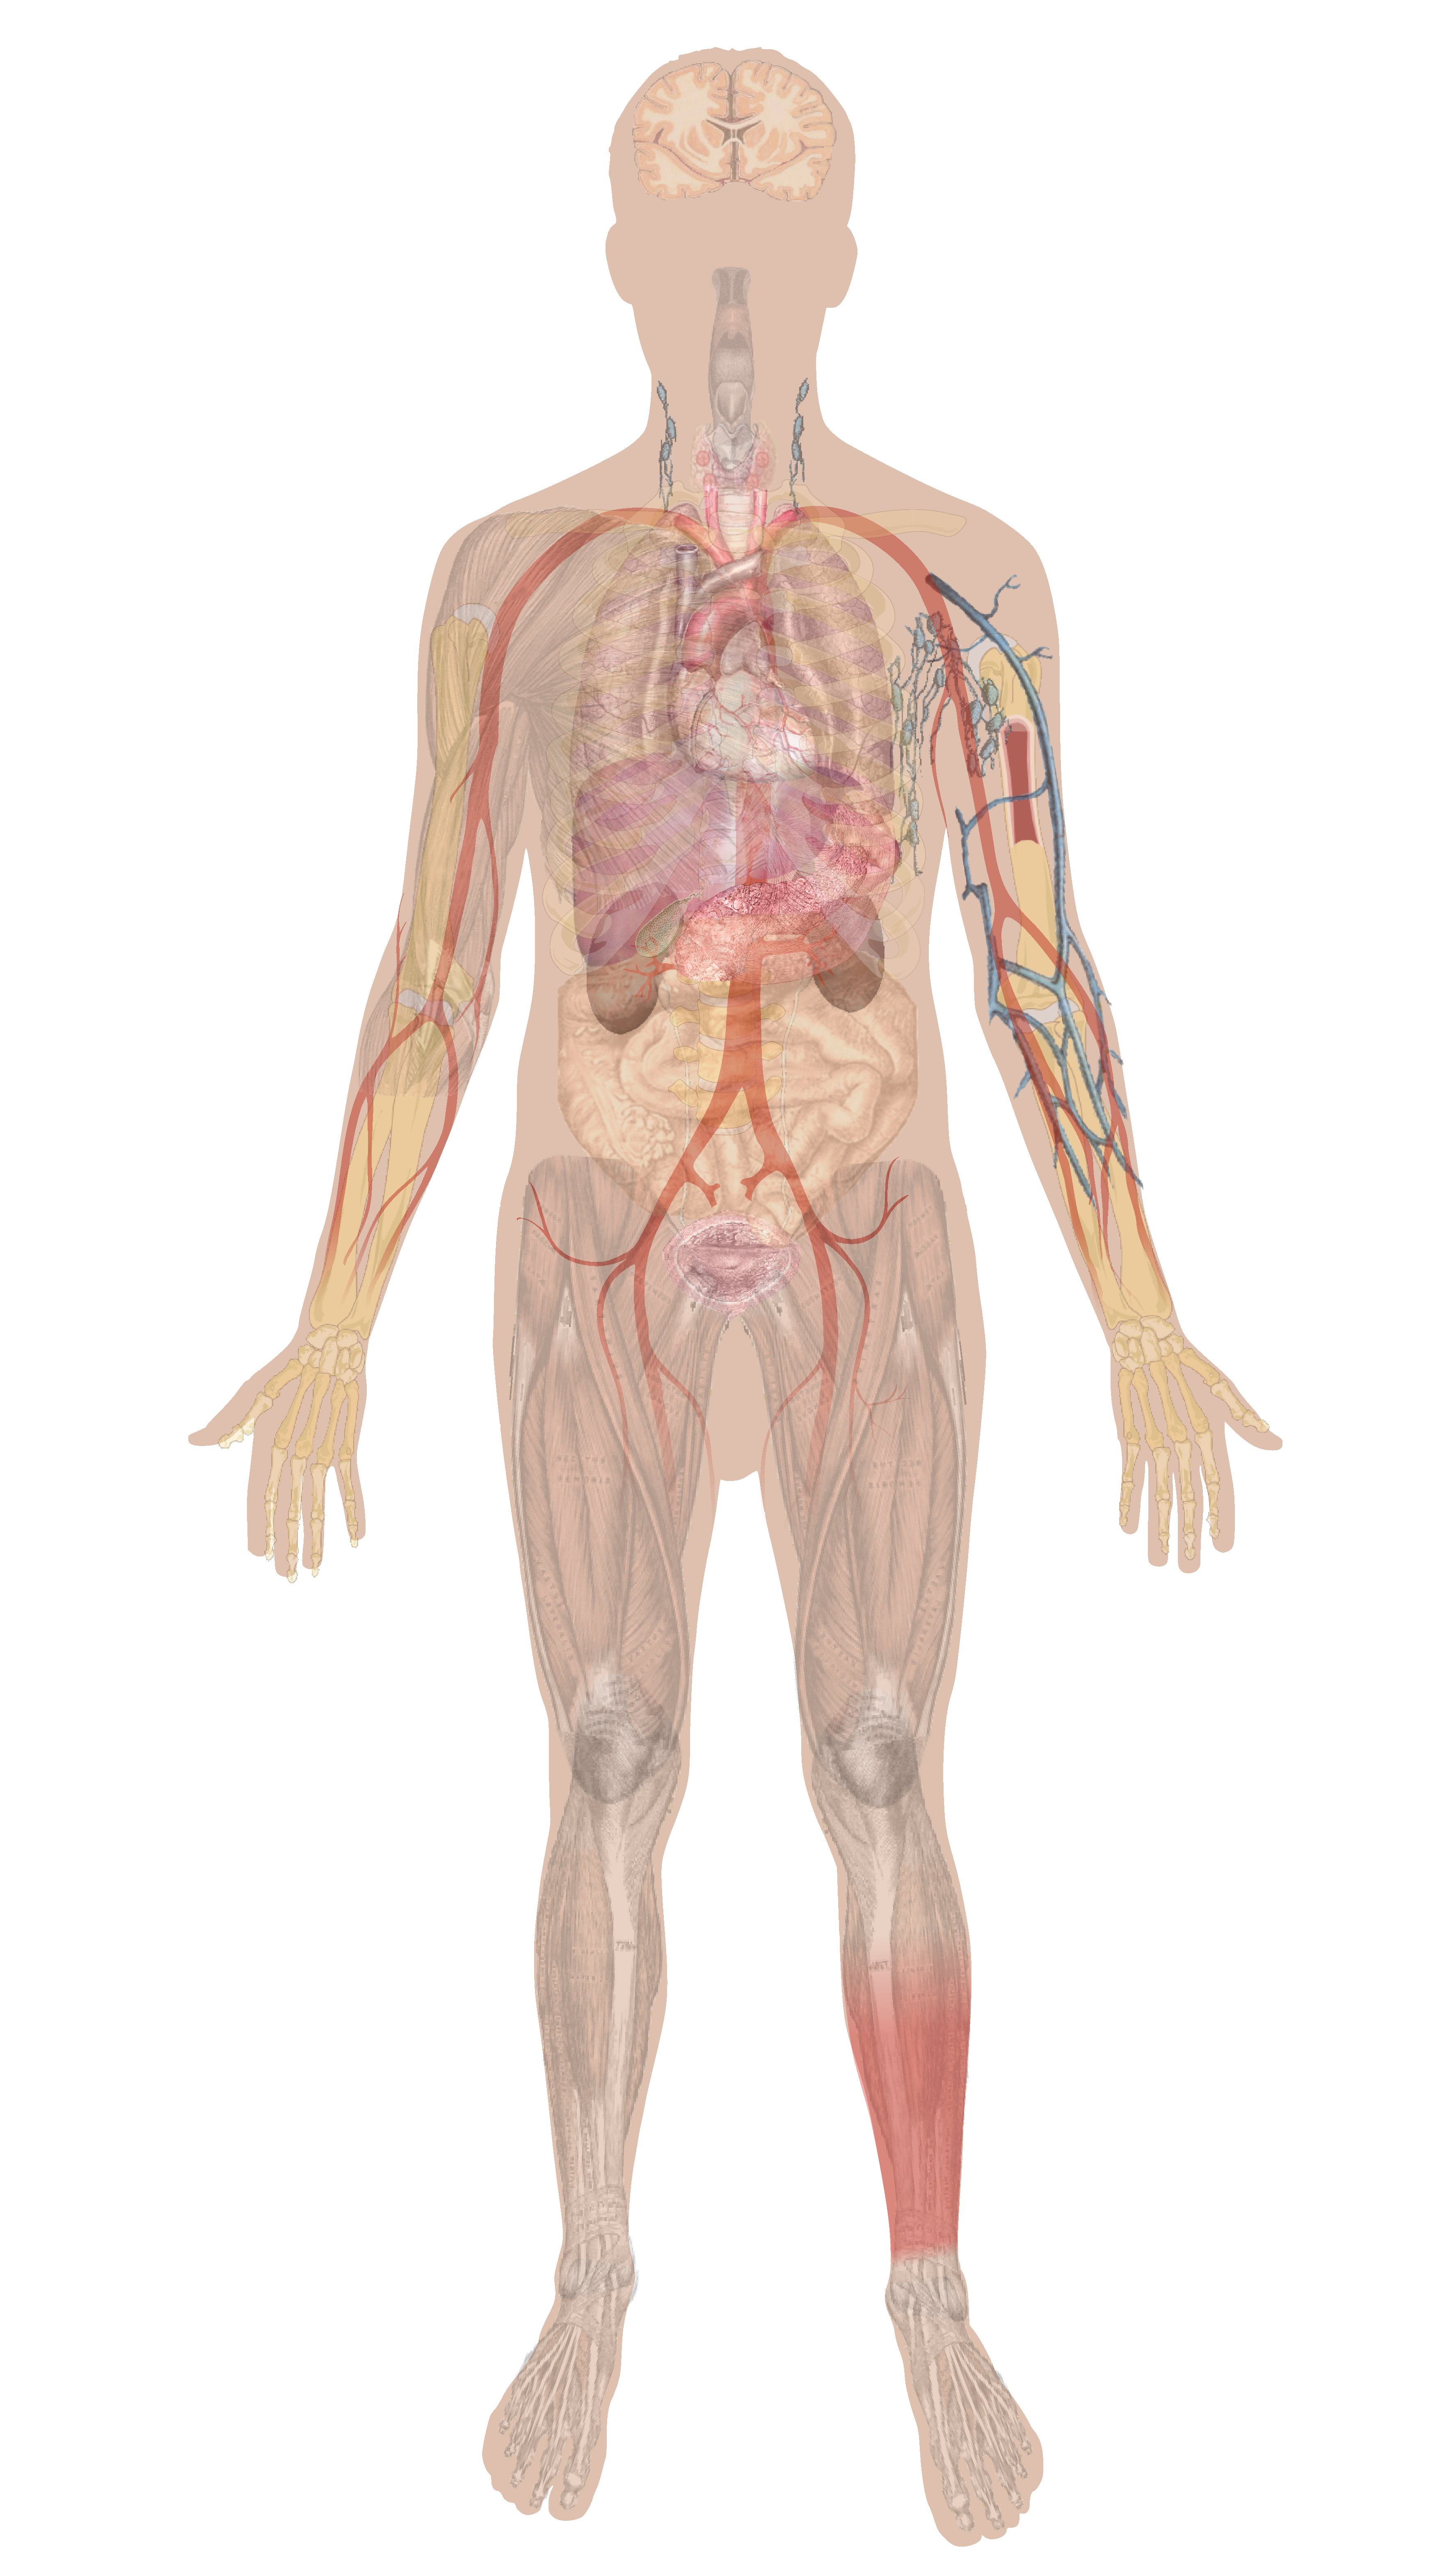 A diagram of the human body showing the primary organs and structures, including the brain, stomach, skeleton, lungs, and heart.